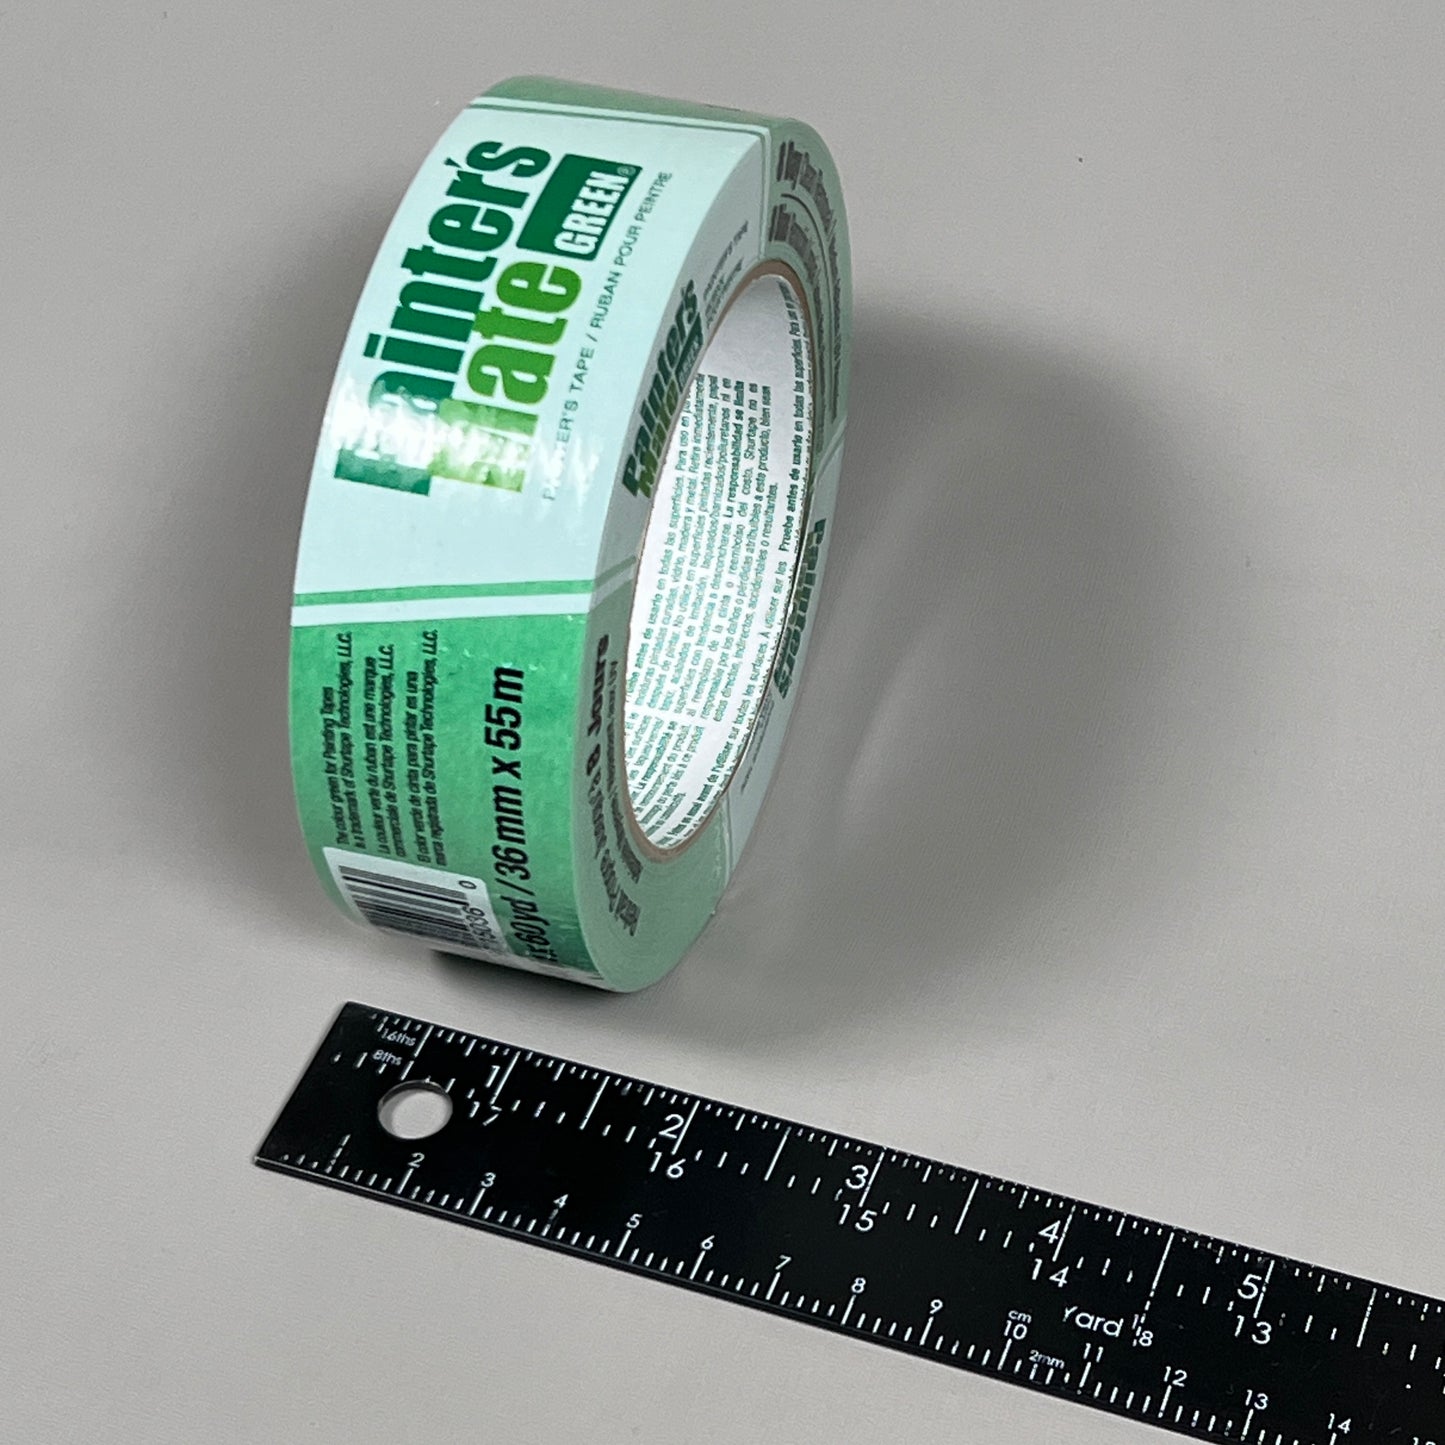 2-PK PAINTER'S MATE Multi-Surface Painter's Tape Green 1.41 IN x 60 YD 332261 (New)